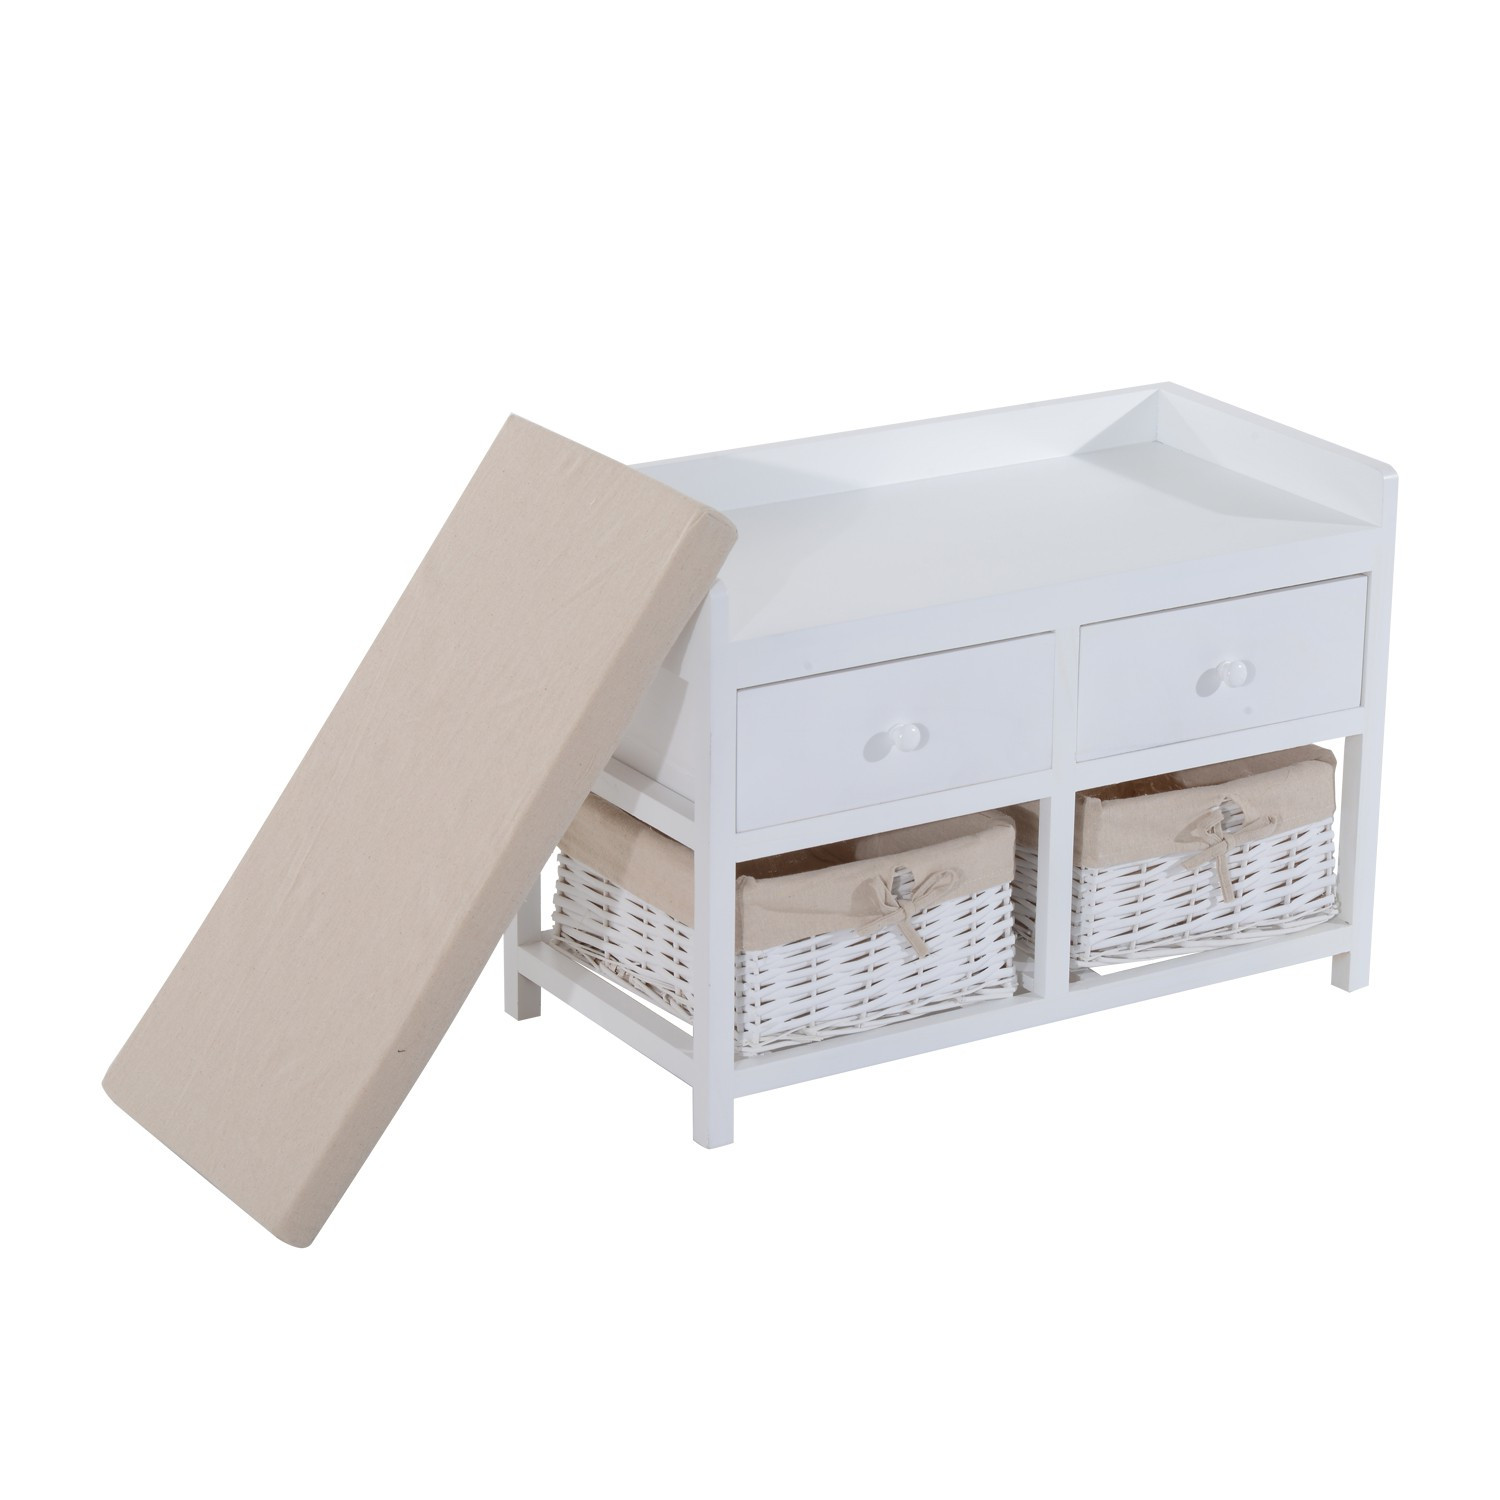 2 Cubby Storage Bench
 Hom 2 Drawer 2 Basket Padded Cubby Bench White Beige